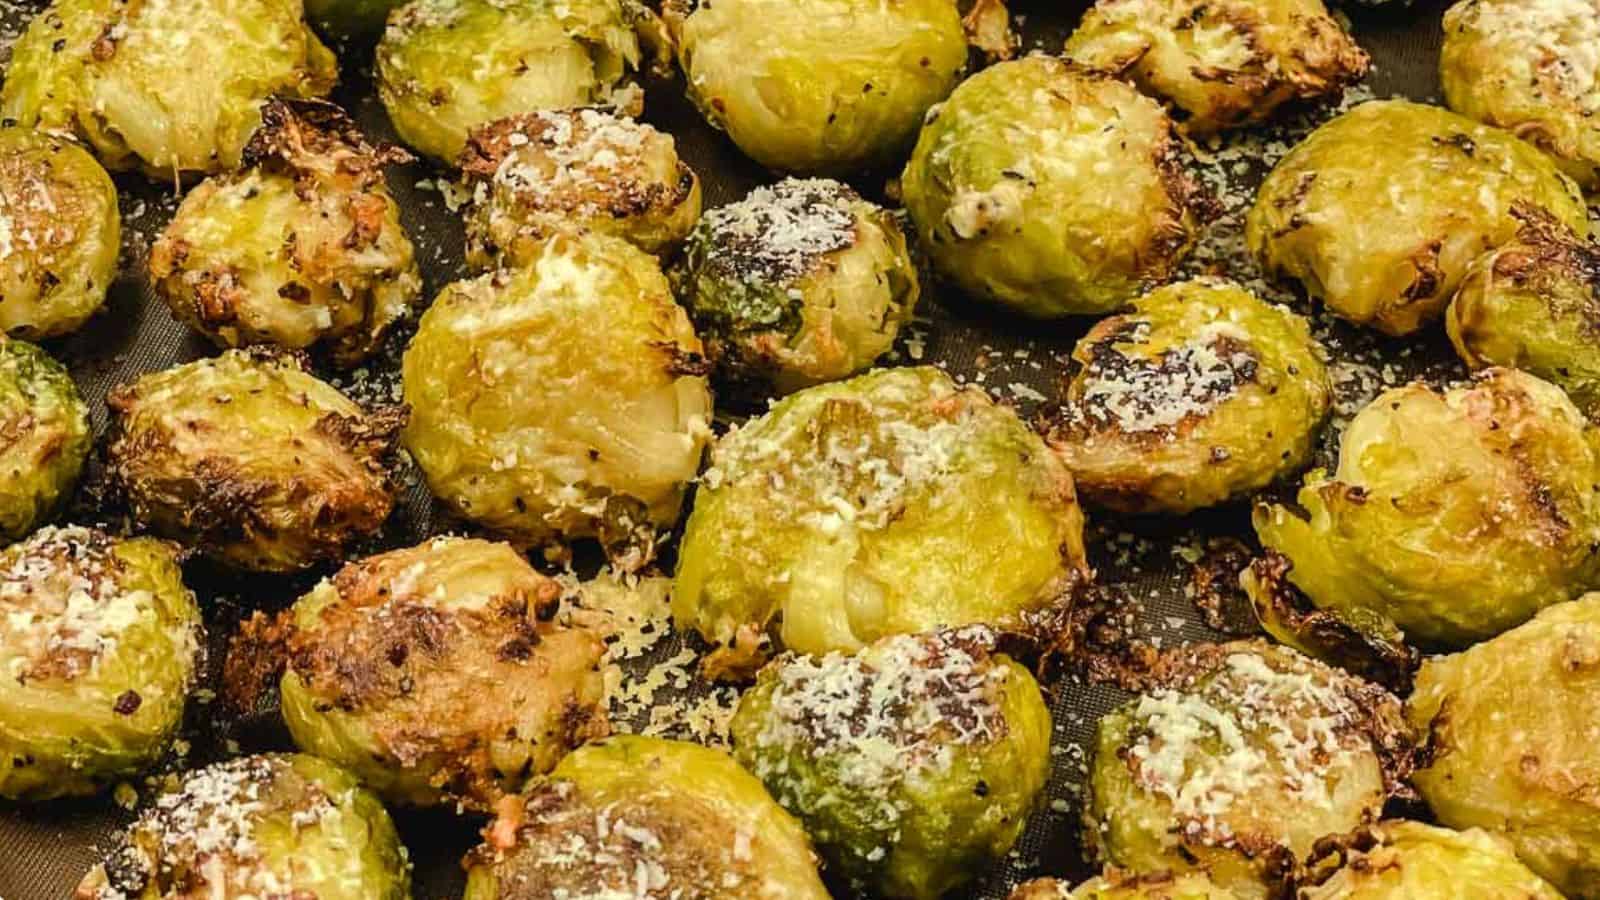 Roasted brussels sprouts on a baking sheet.